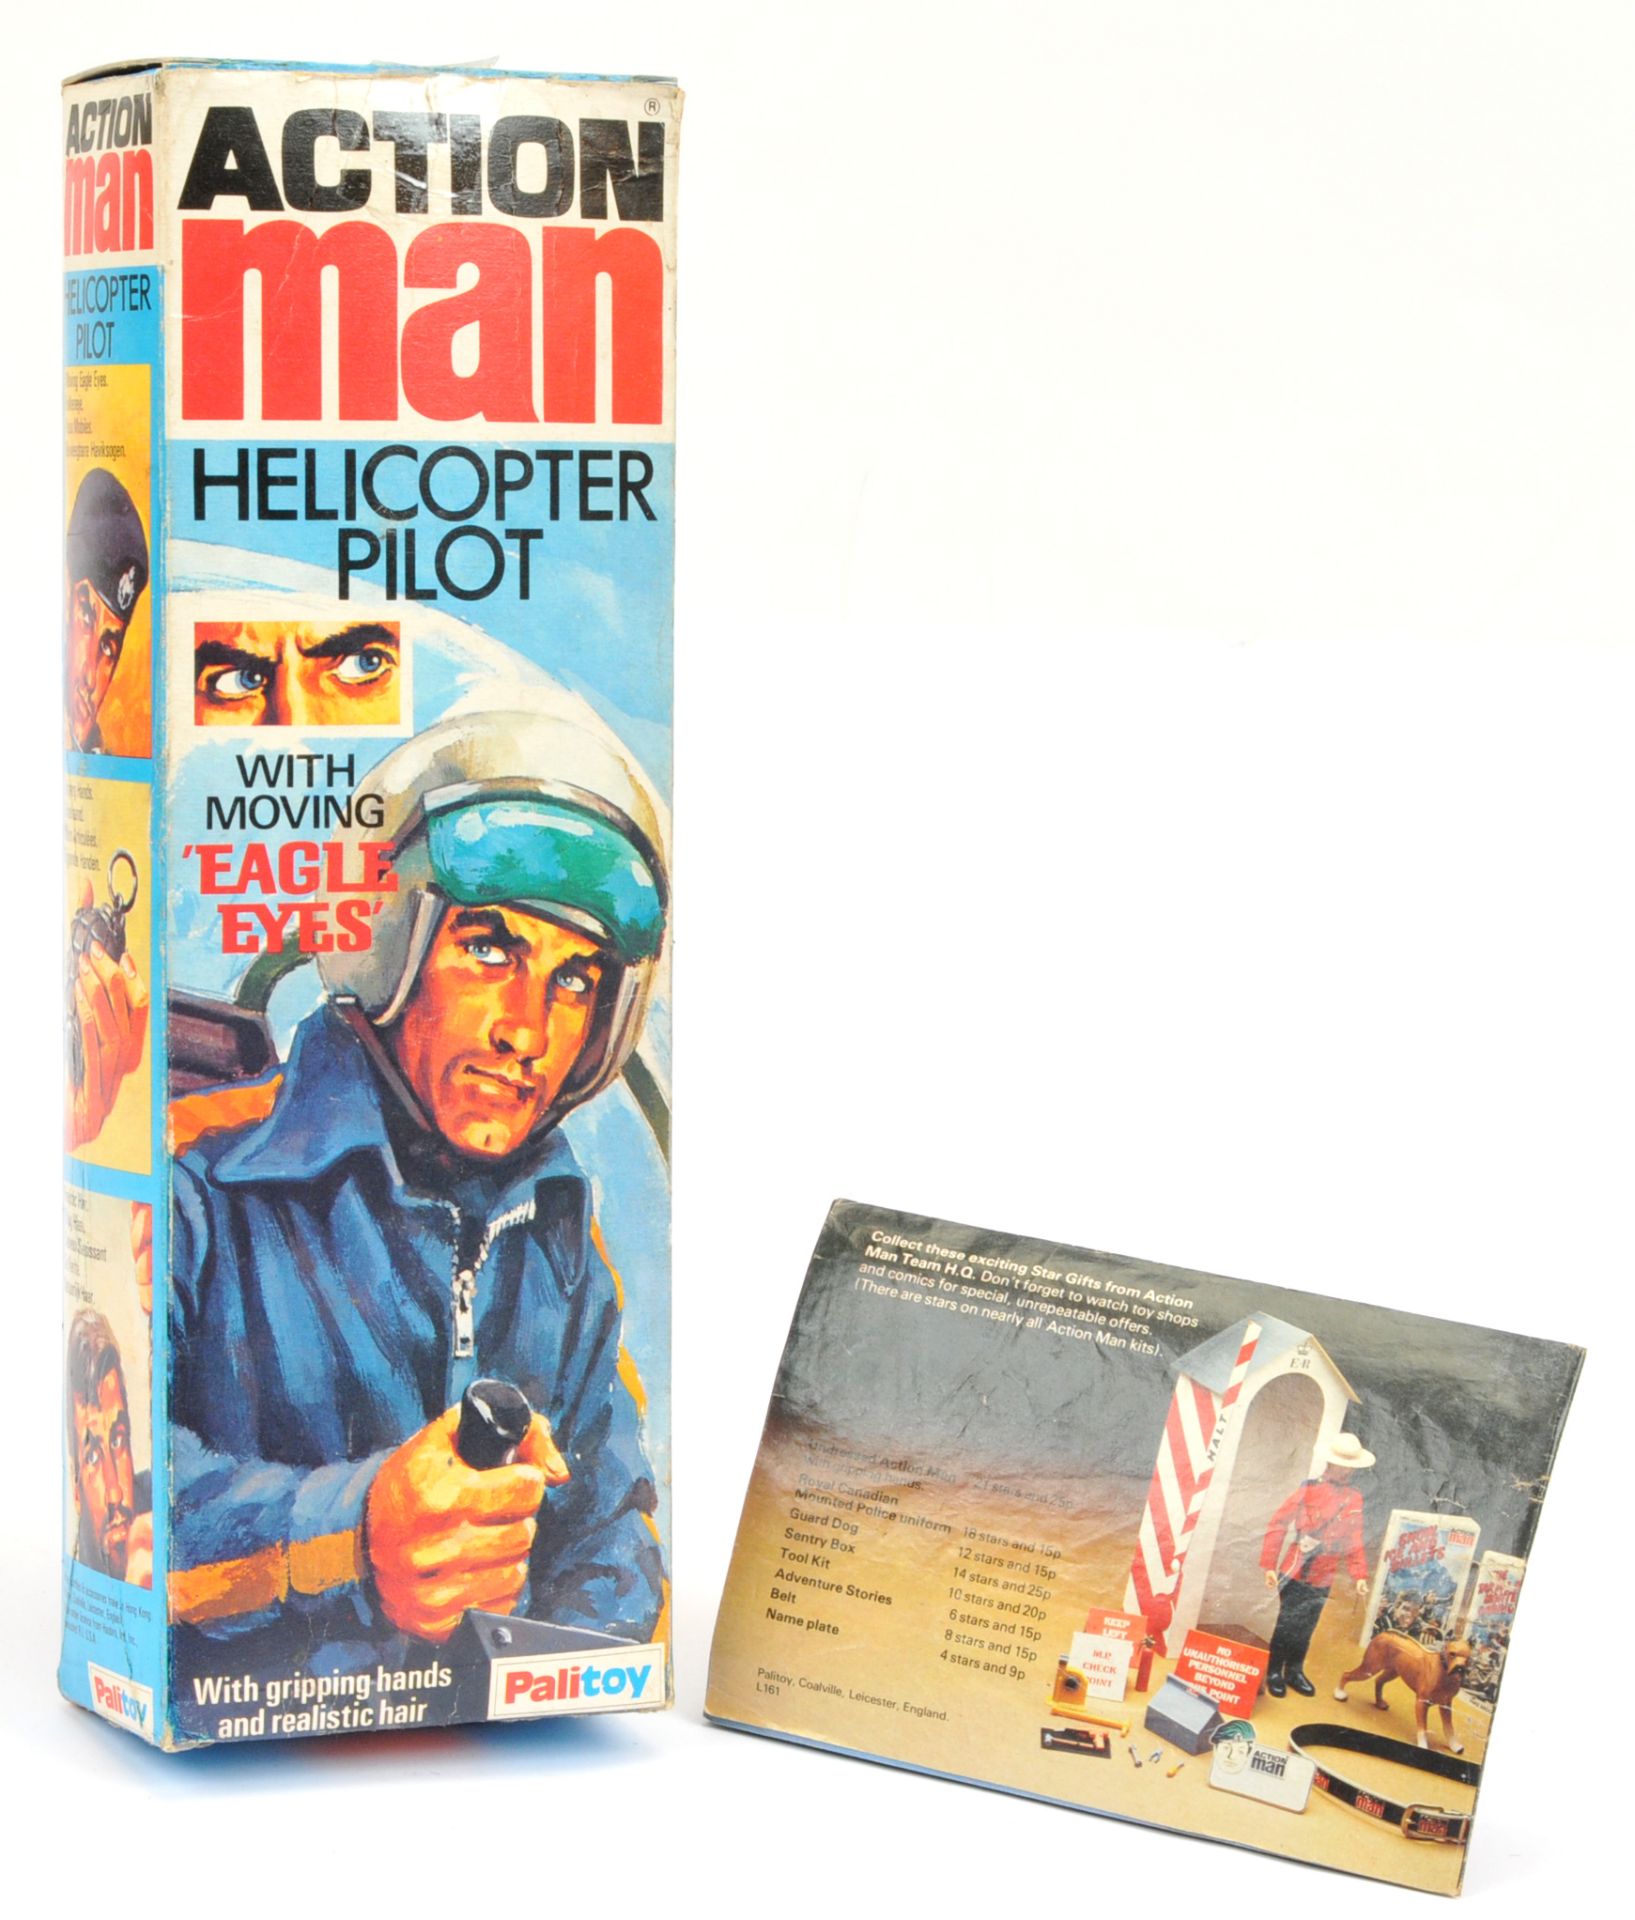 Palitoy Action Man EMPTY Helicopter Pilot box. Condition is Fair Plus. - Image 2 of 2